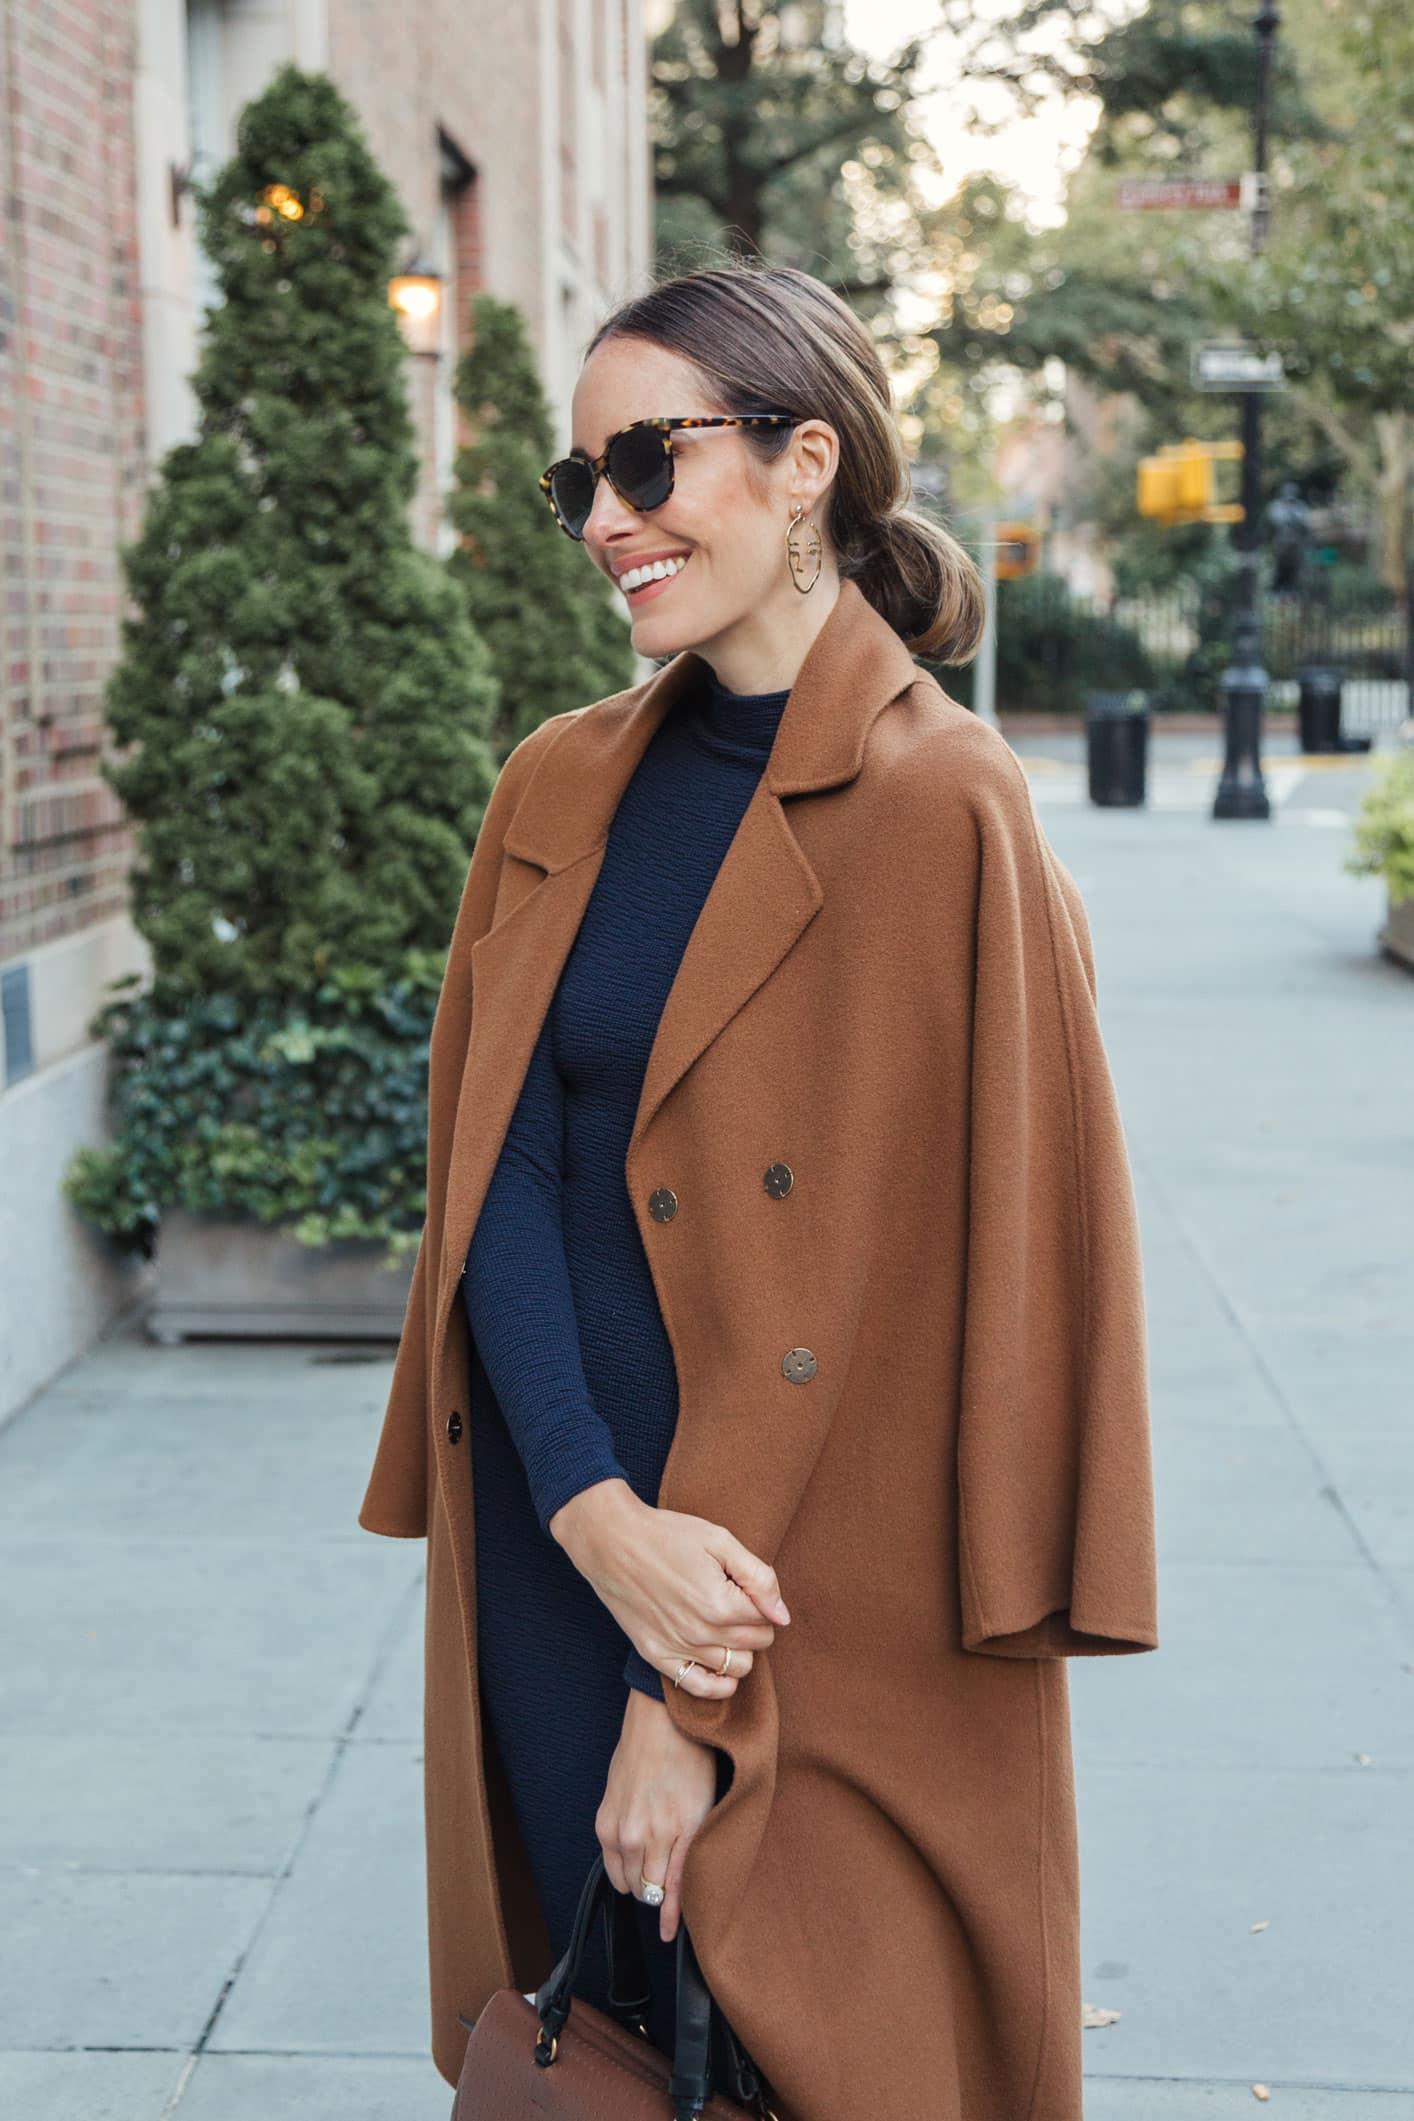 Louise Roe wearing fall outfit with navy dress and camel coat